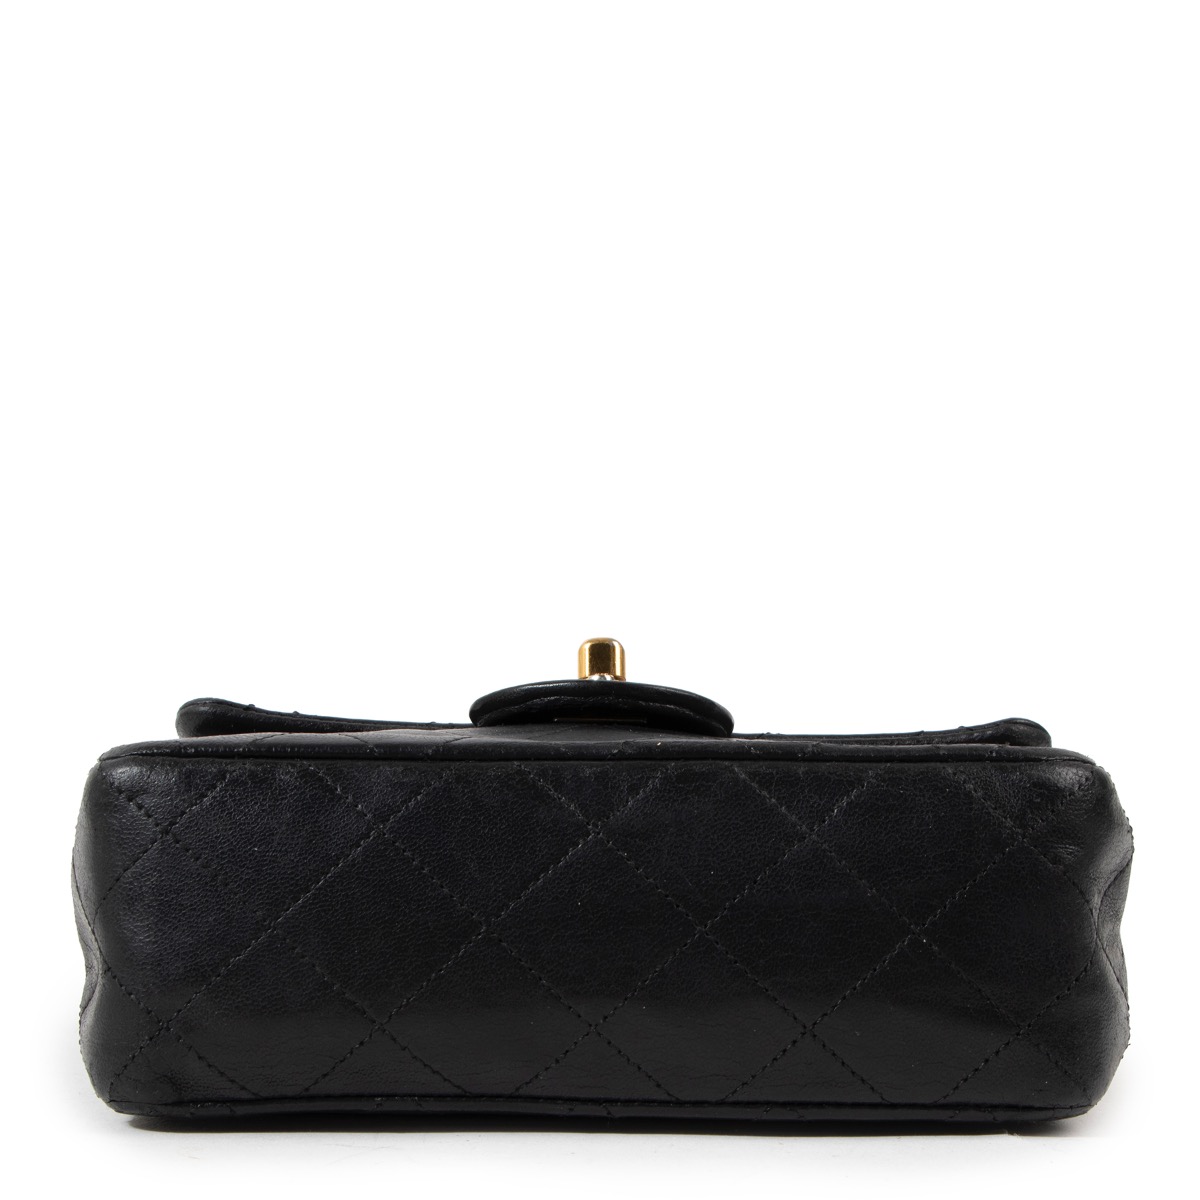 Chanel Black Patent Leather Vintage Vanity Cosmetic Bag Chanel